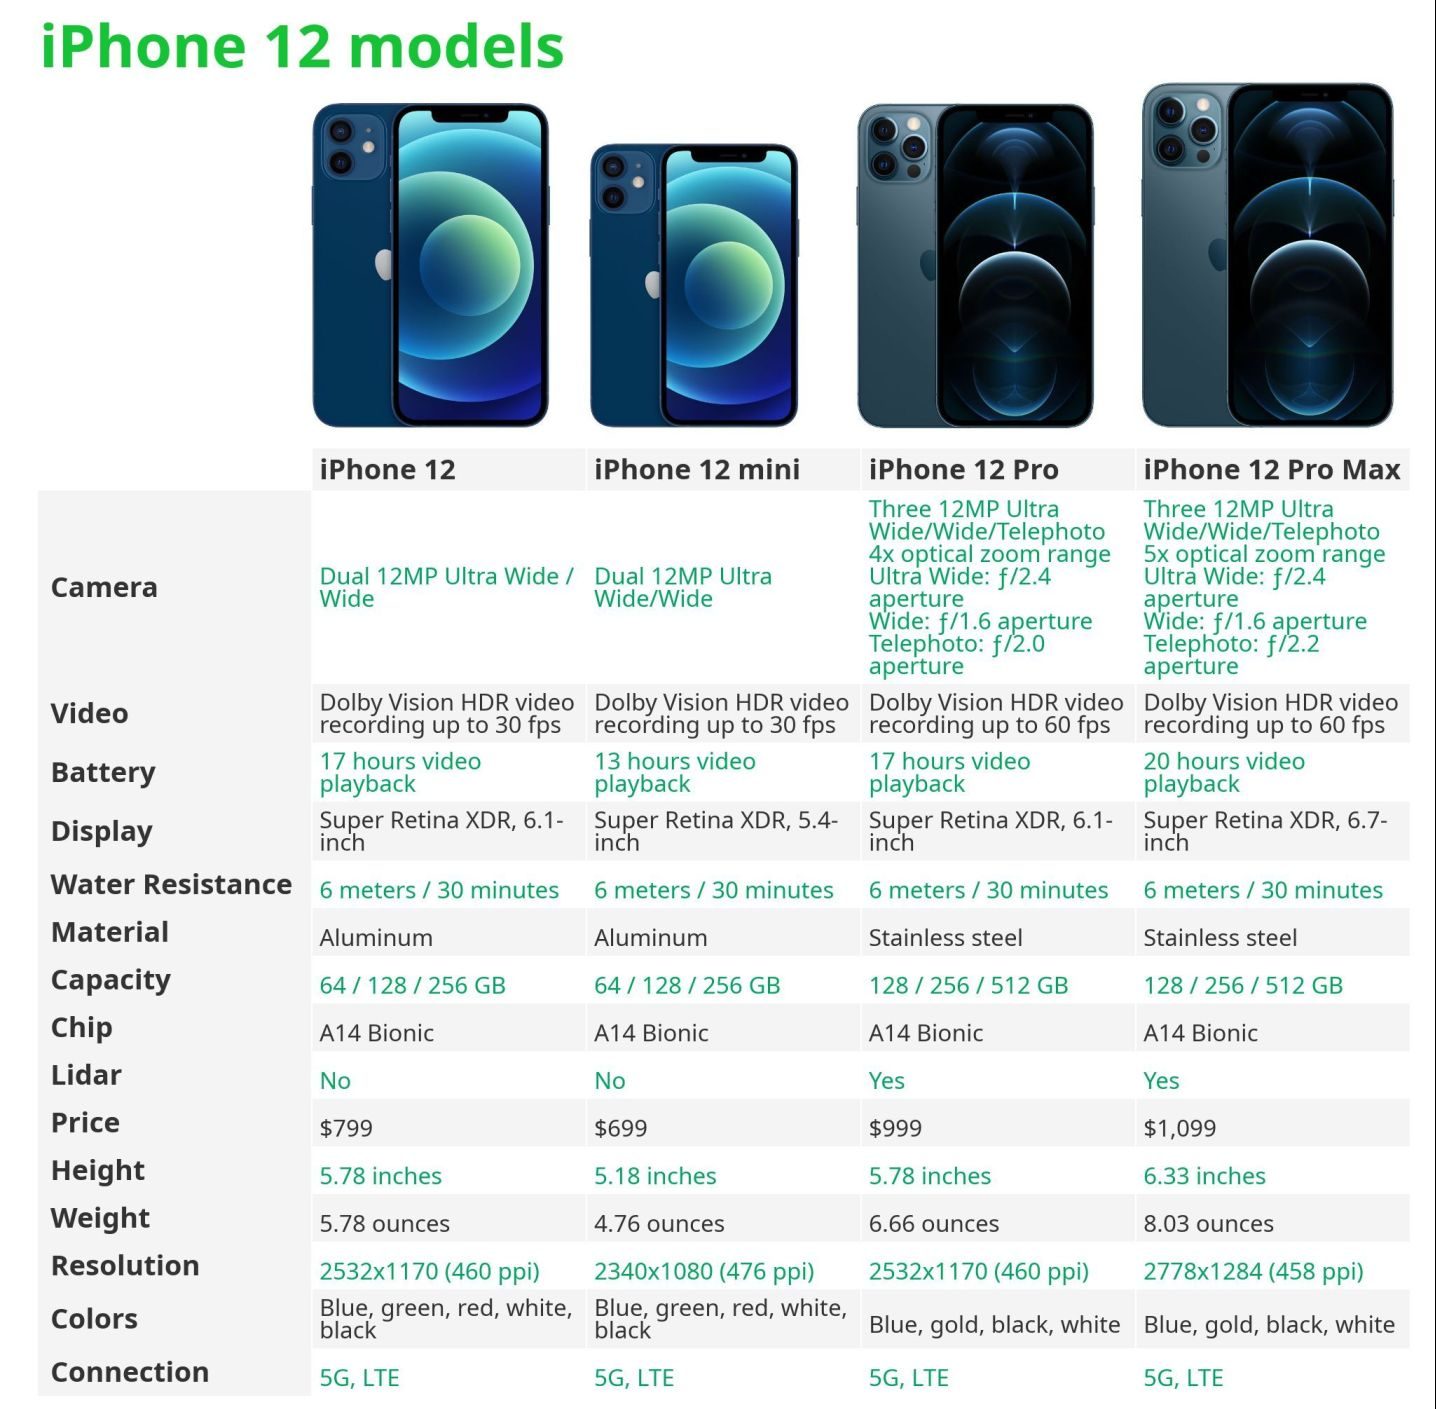 iphone 12 models differences e1602702915580